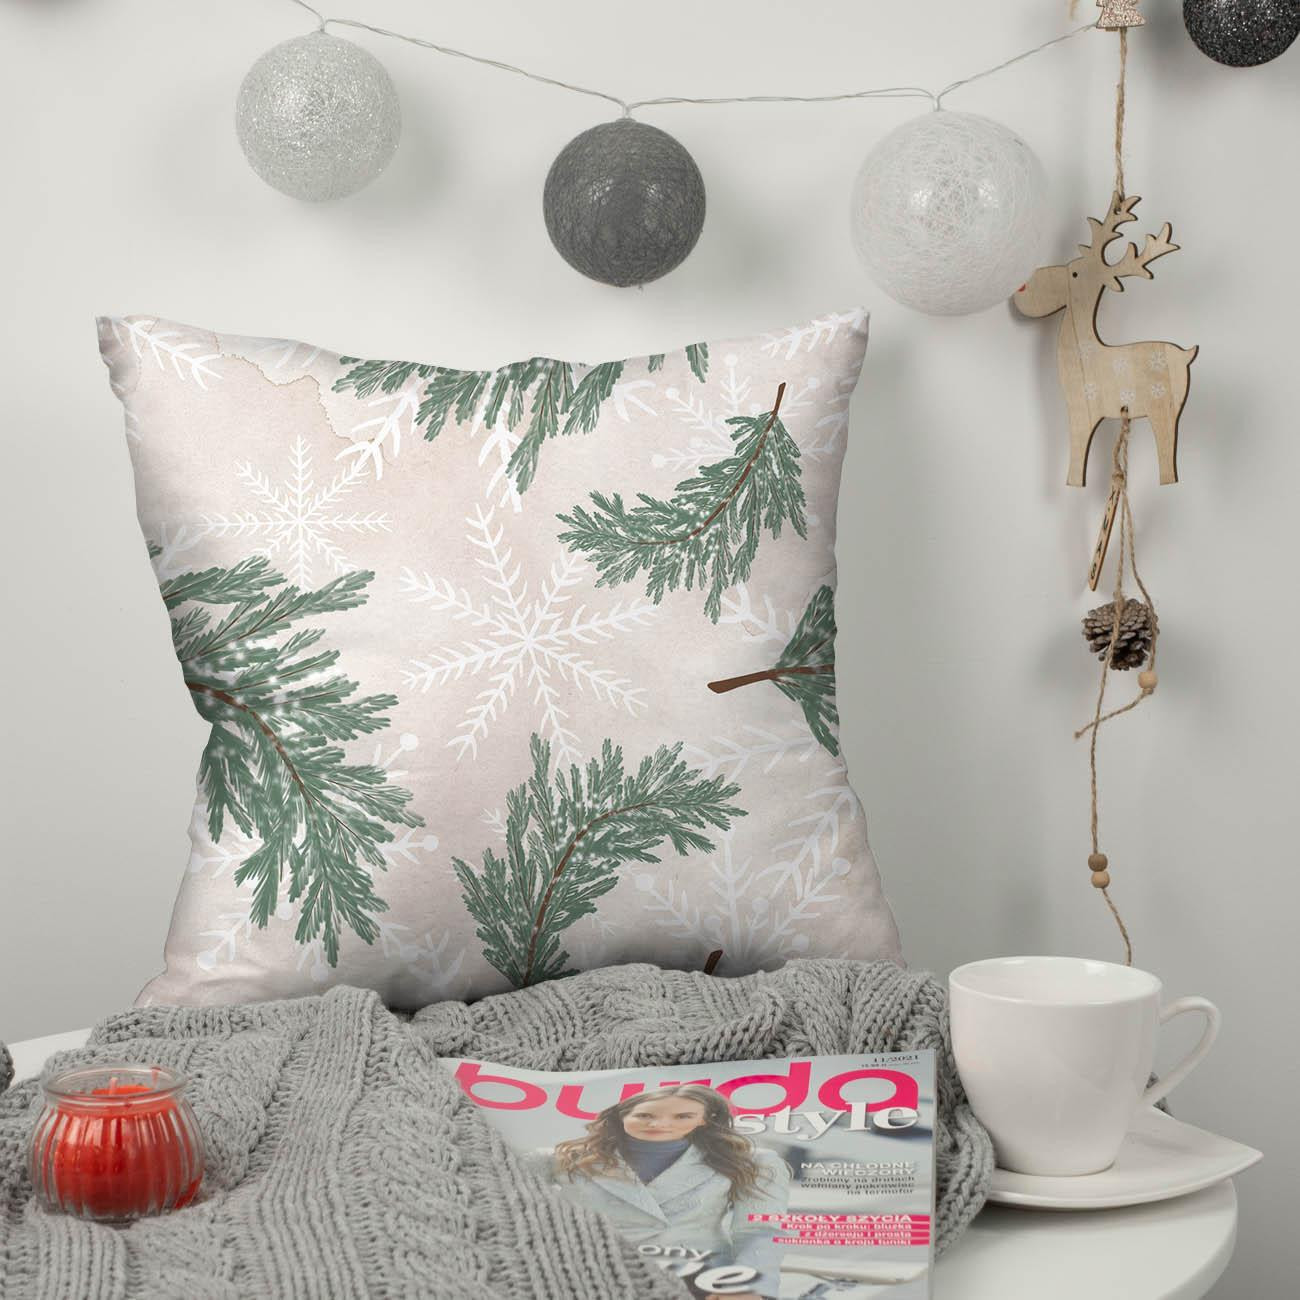 TWIGS AND SNOWFLAKES (WINTER IN THE CITY) - Cotton woven fabric